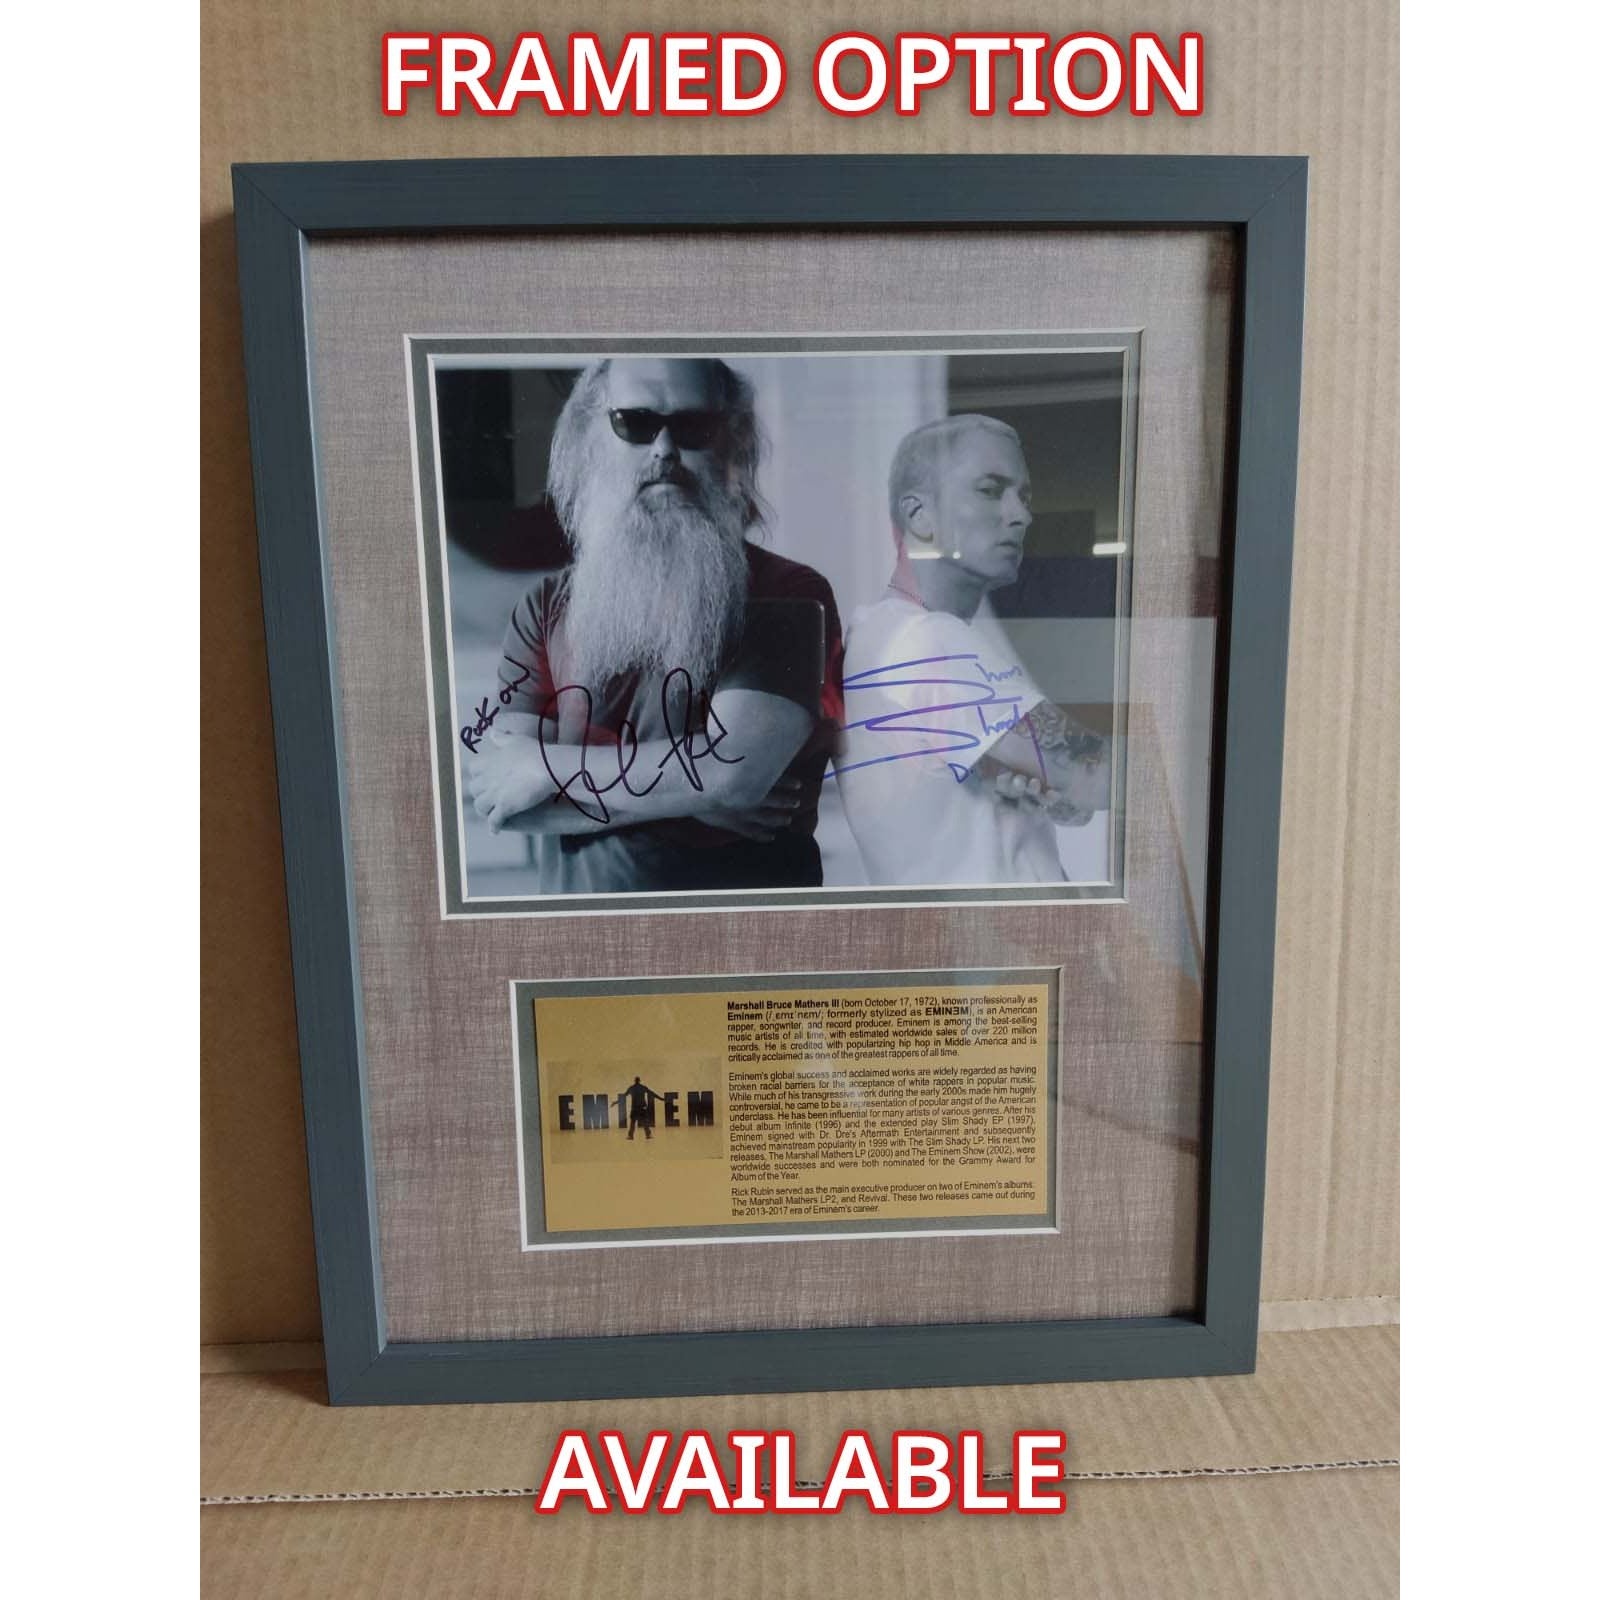 Billy Gibbons and Gregg Allman 5x7 photo signed with proof